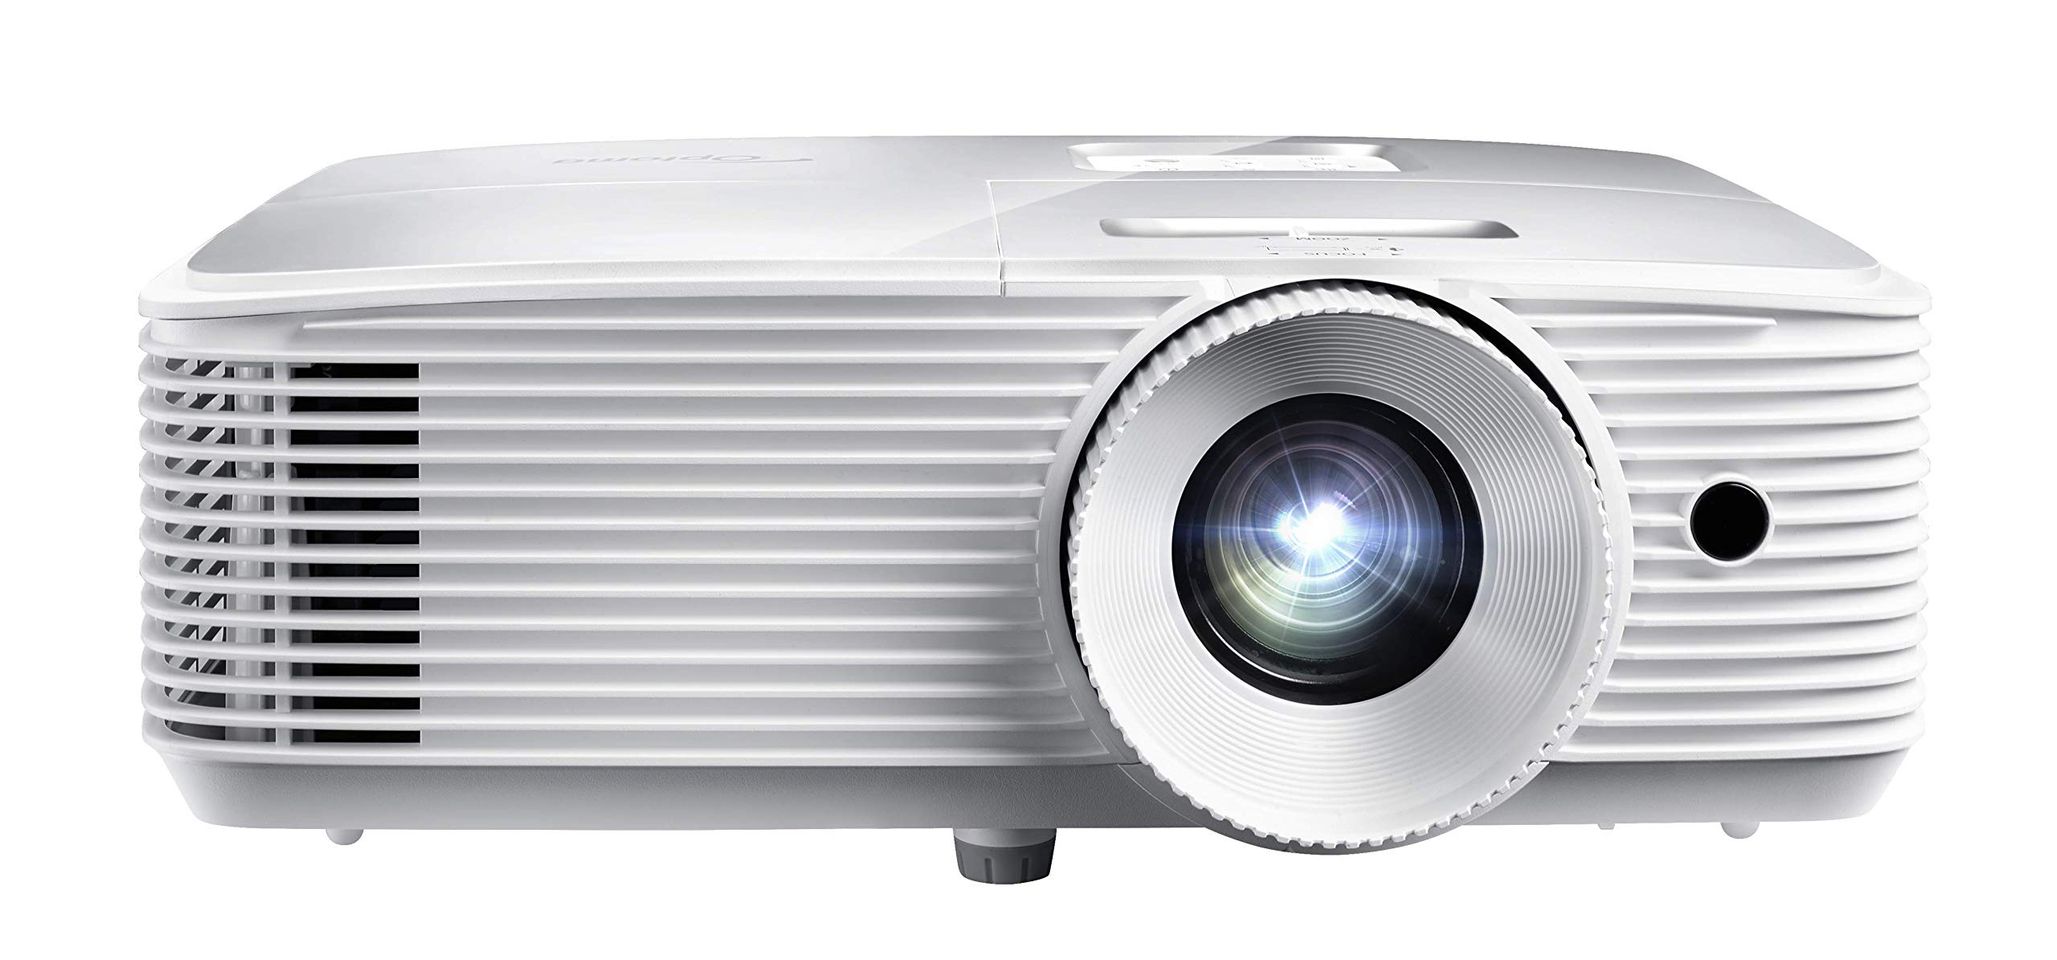 Optoma HD27HDR 1080p Home Theater Projector Review